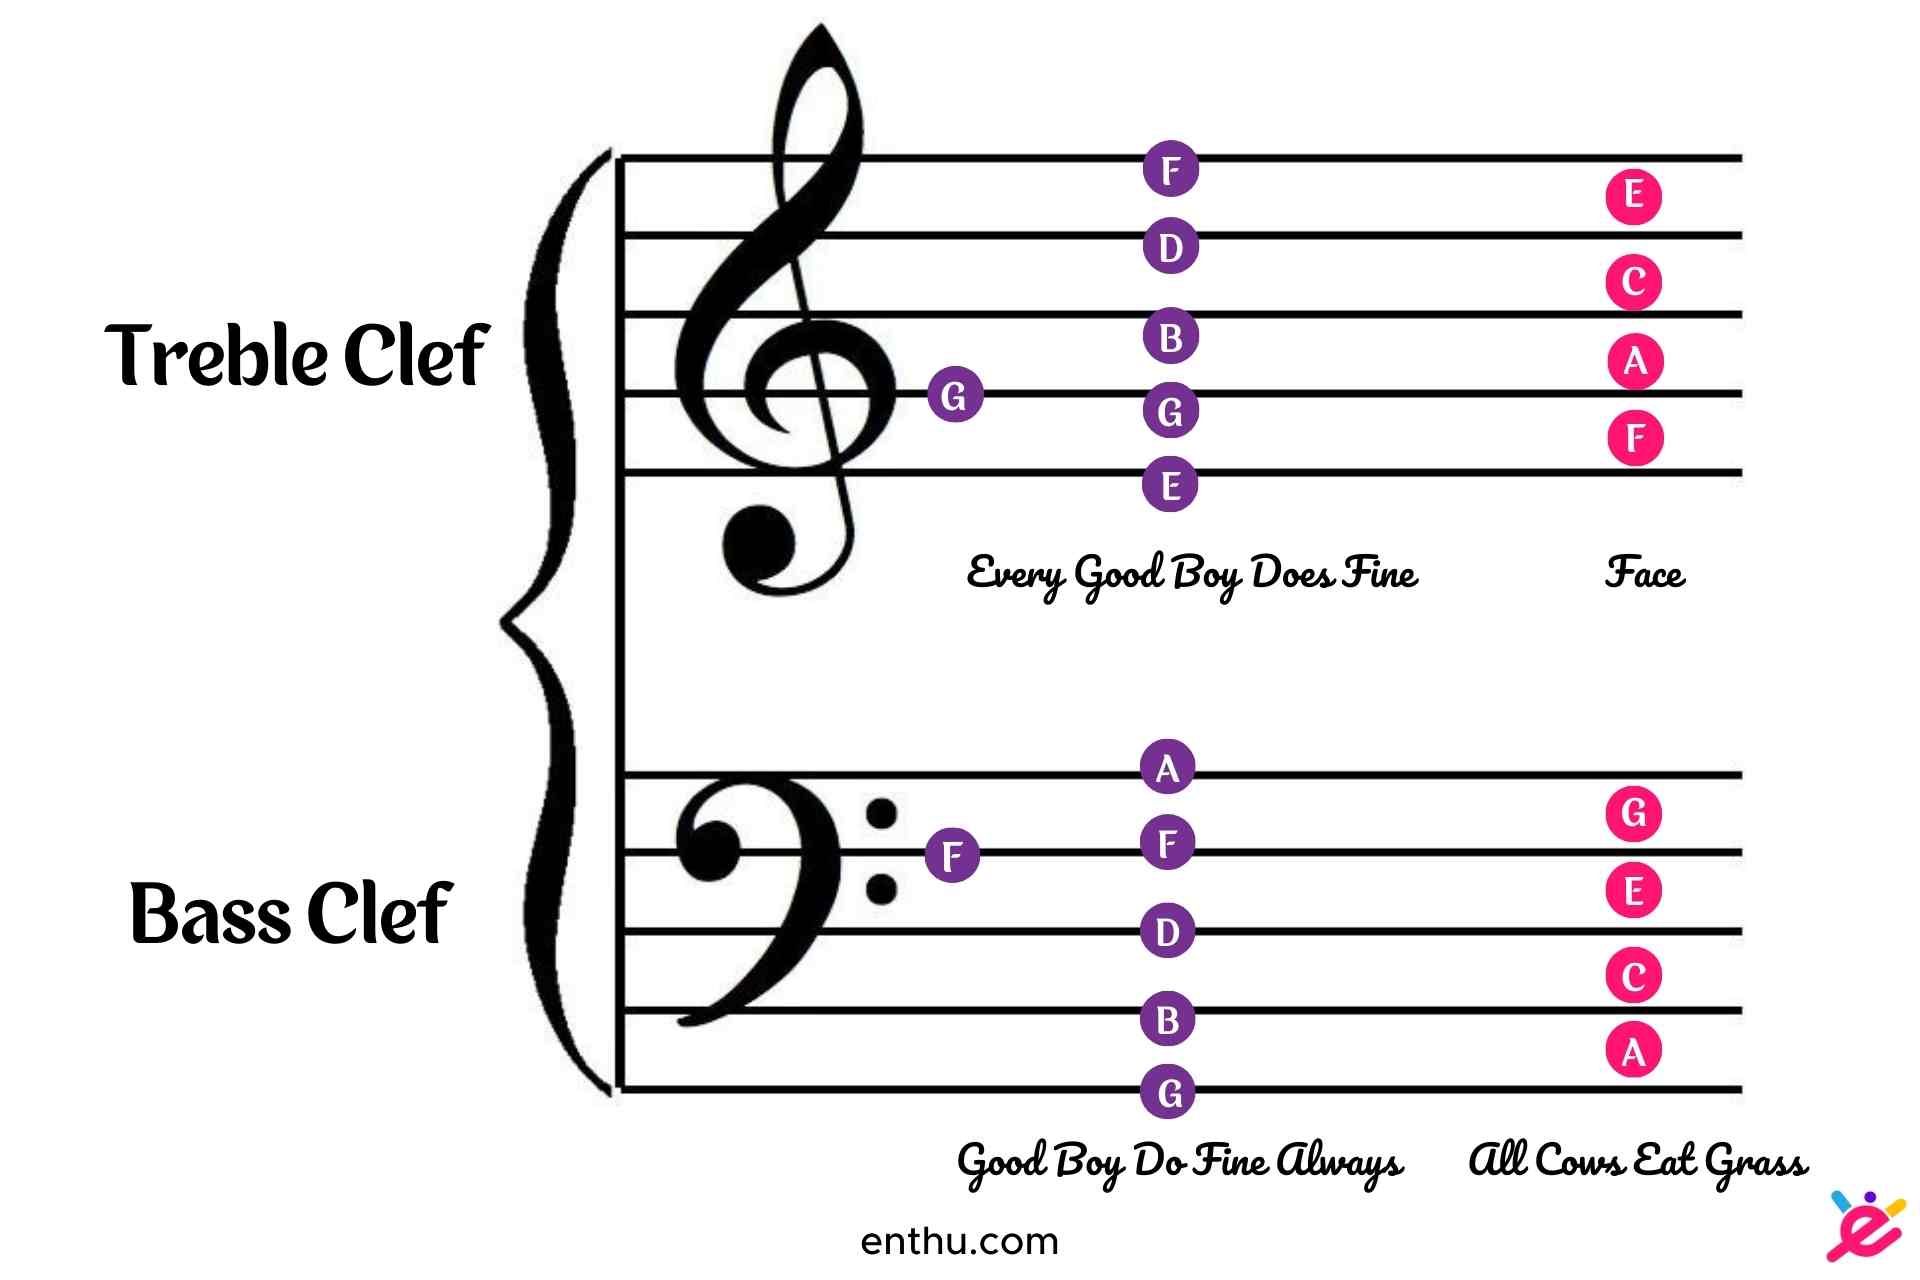 How to Read Piano Sheet Music - Treble clef and bass clef